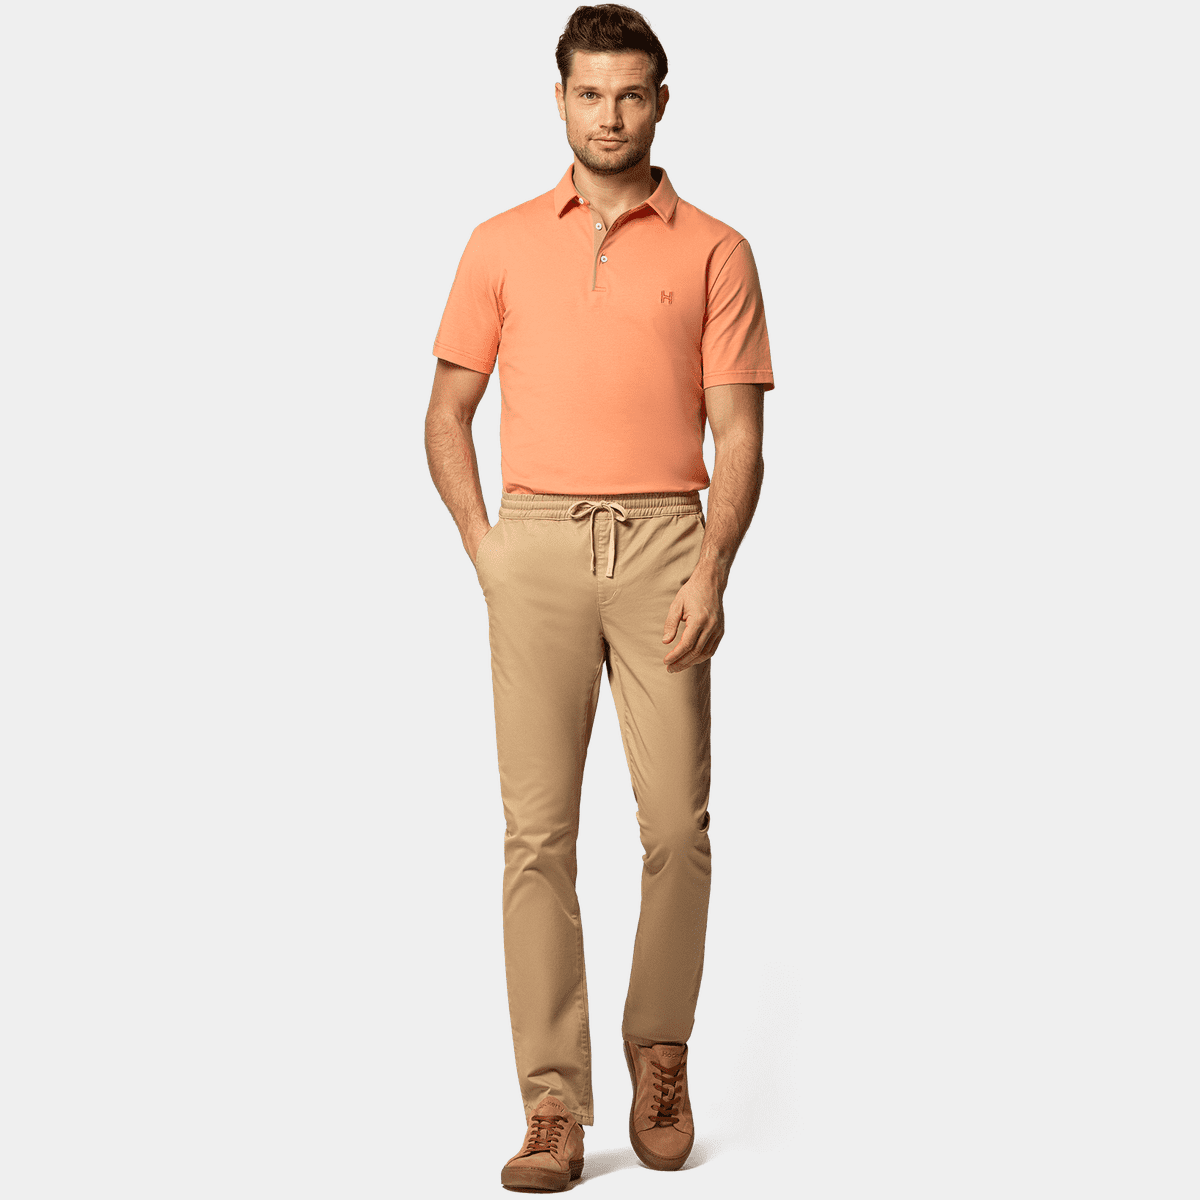 Cotton Trousers - Classic Polo | Casual shirts, Cream trousers, Classic